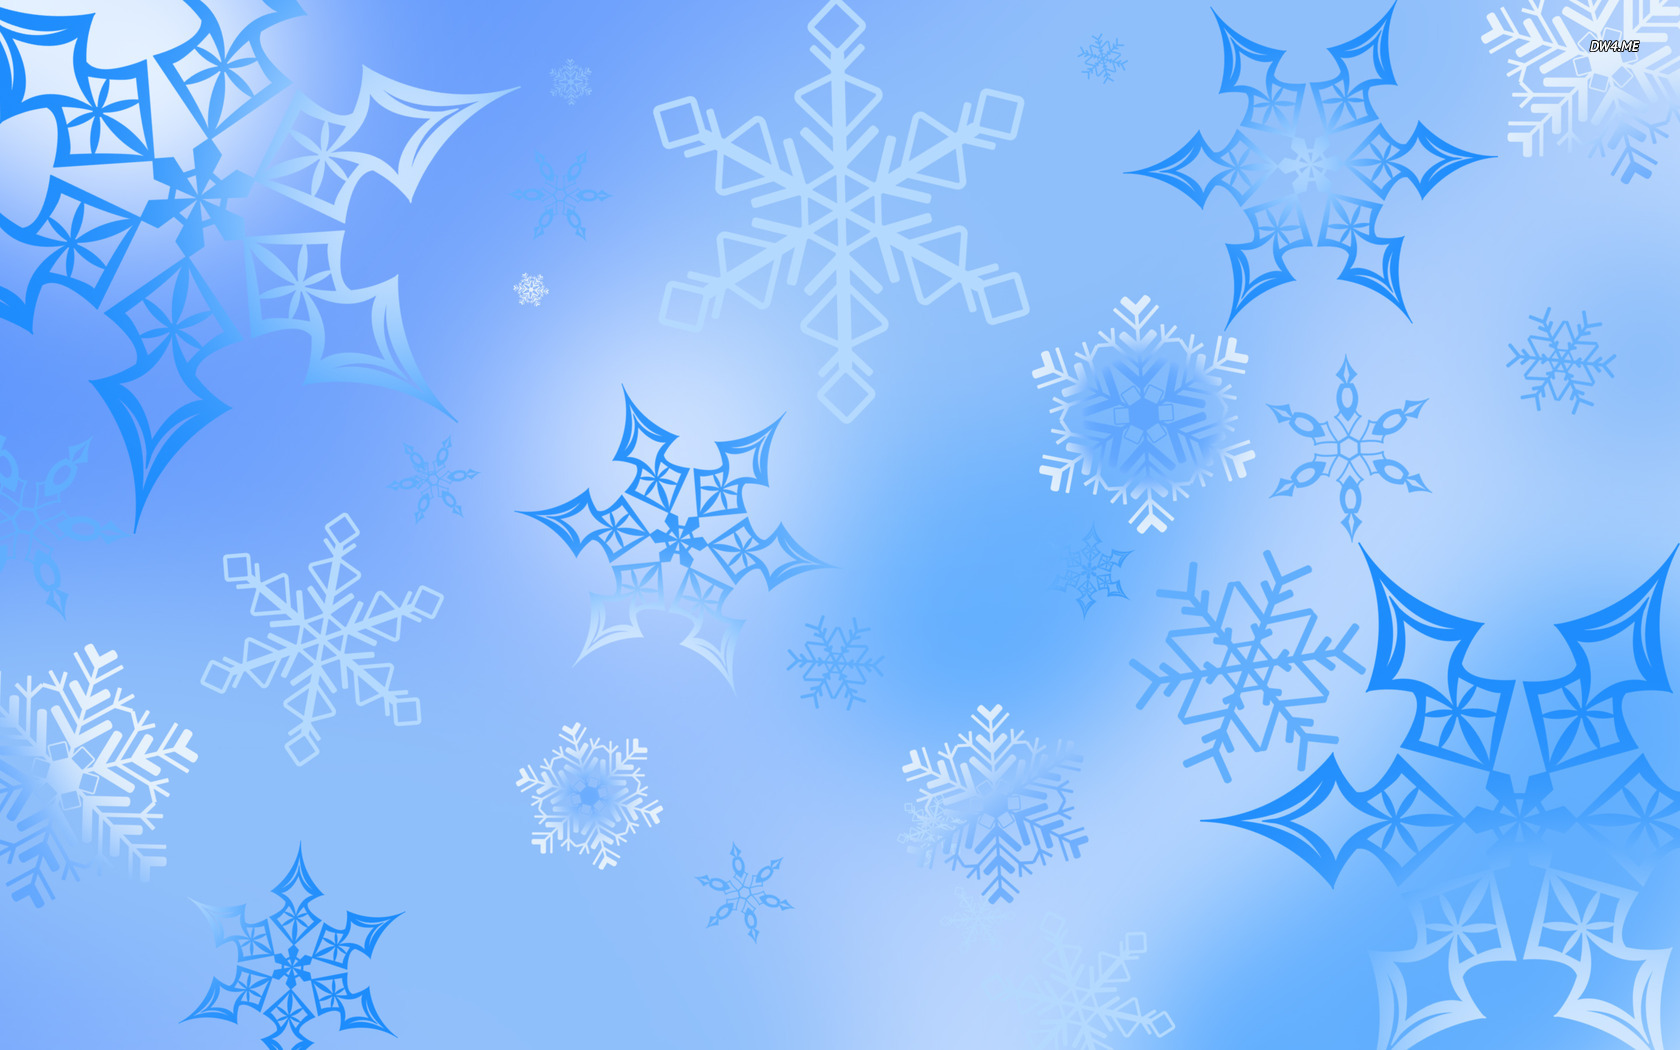 Snowflake Background Images HD Pictures and Wallpaper For Free Download   Pngtree